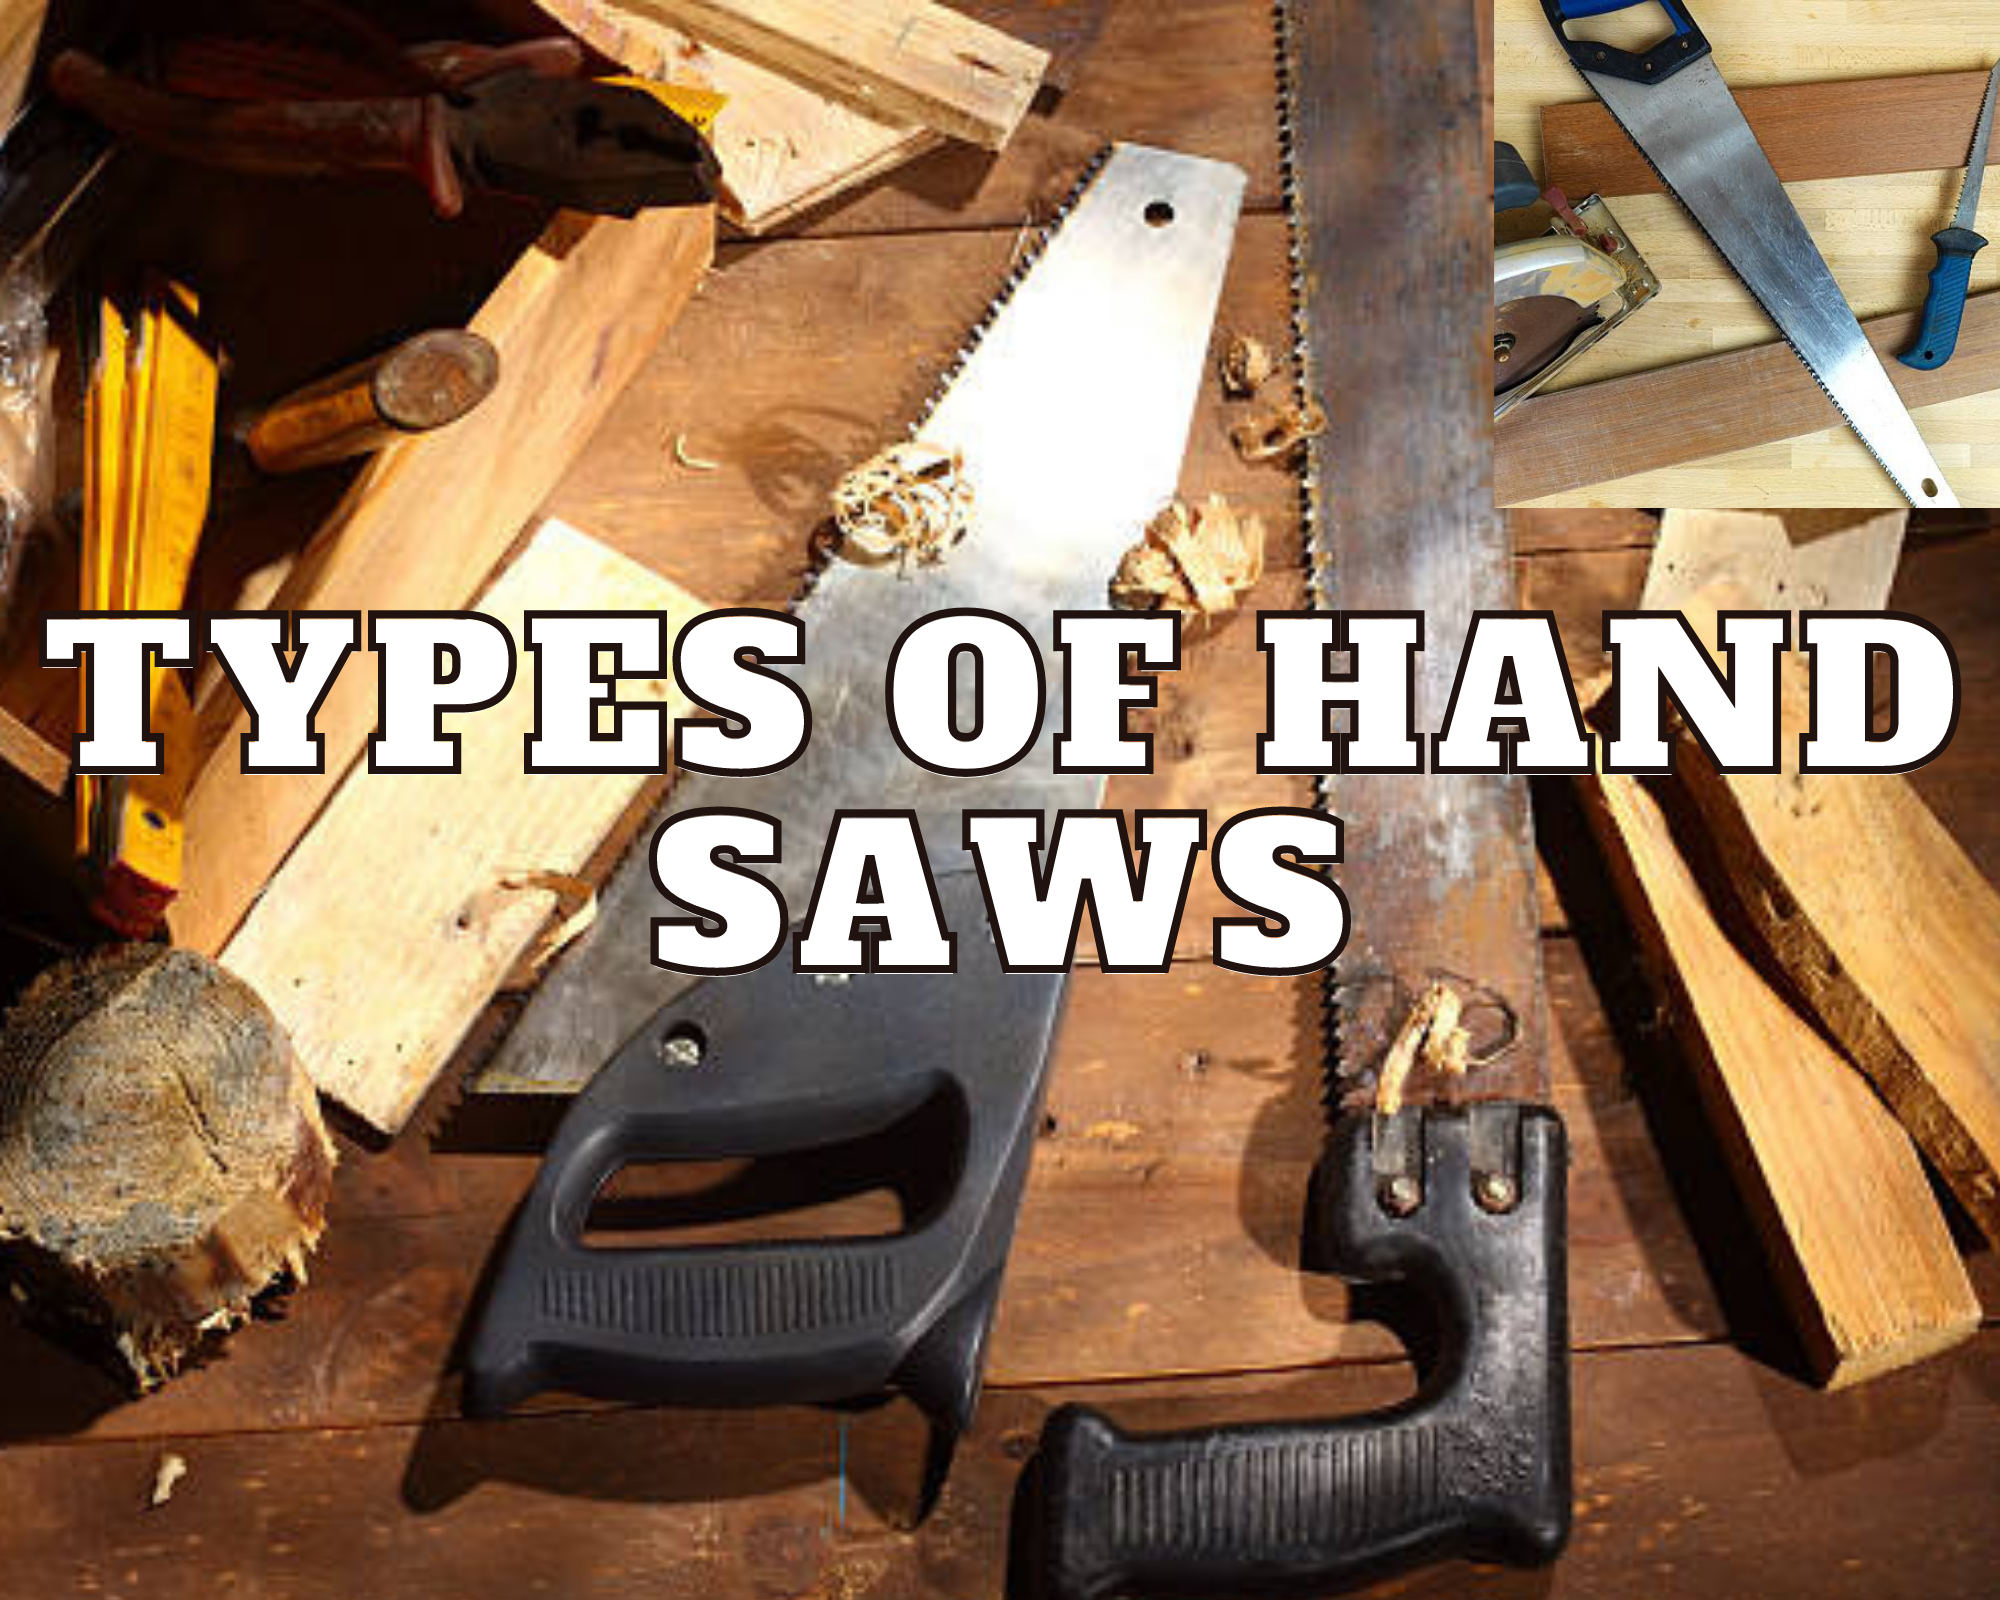 Types of handsaws and their uses